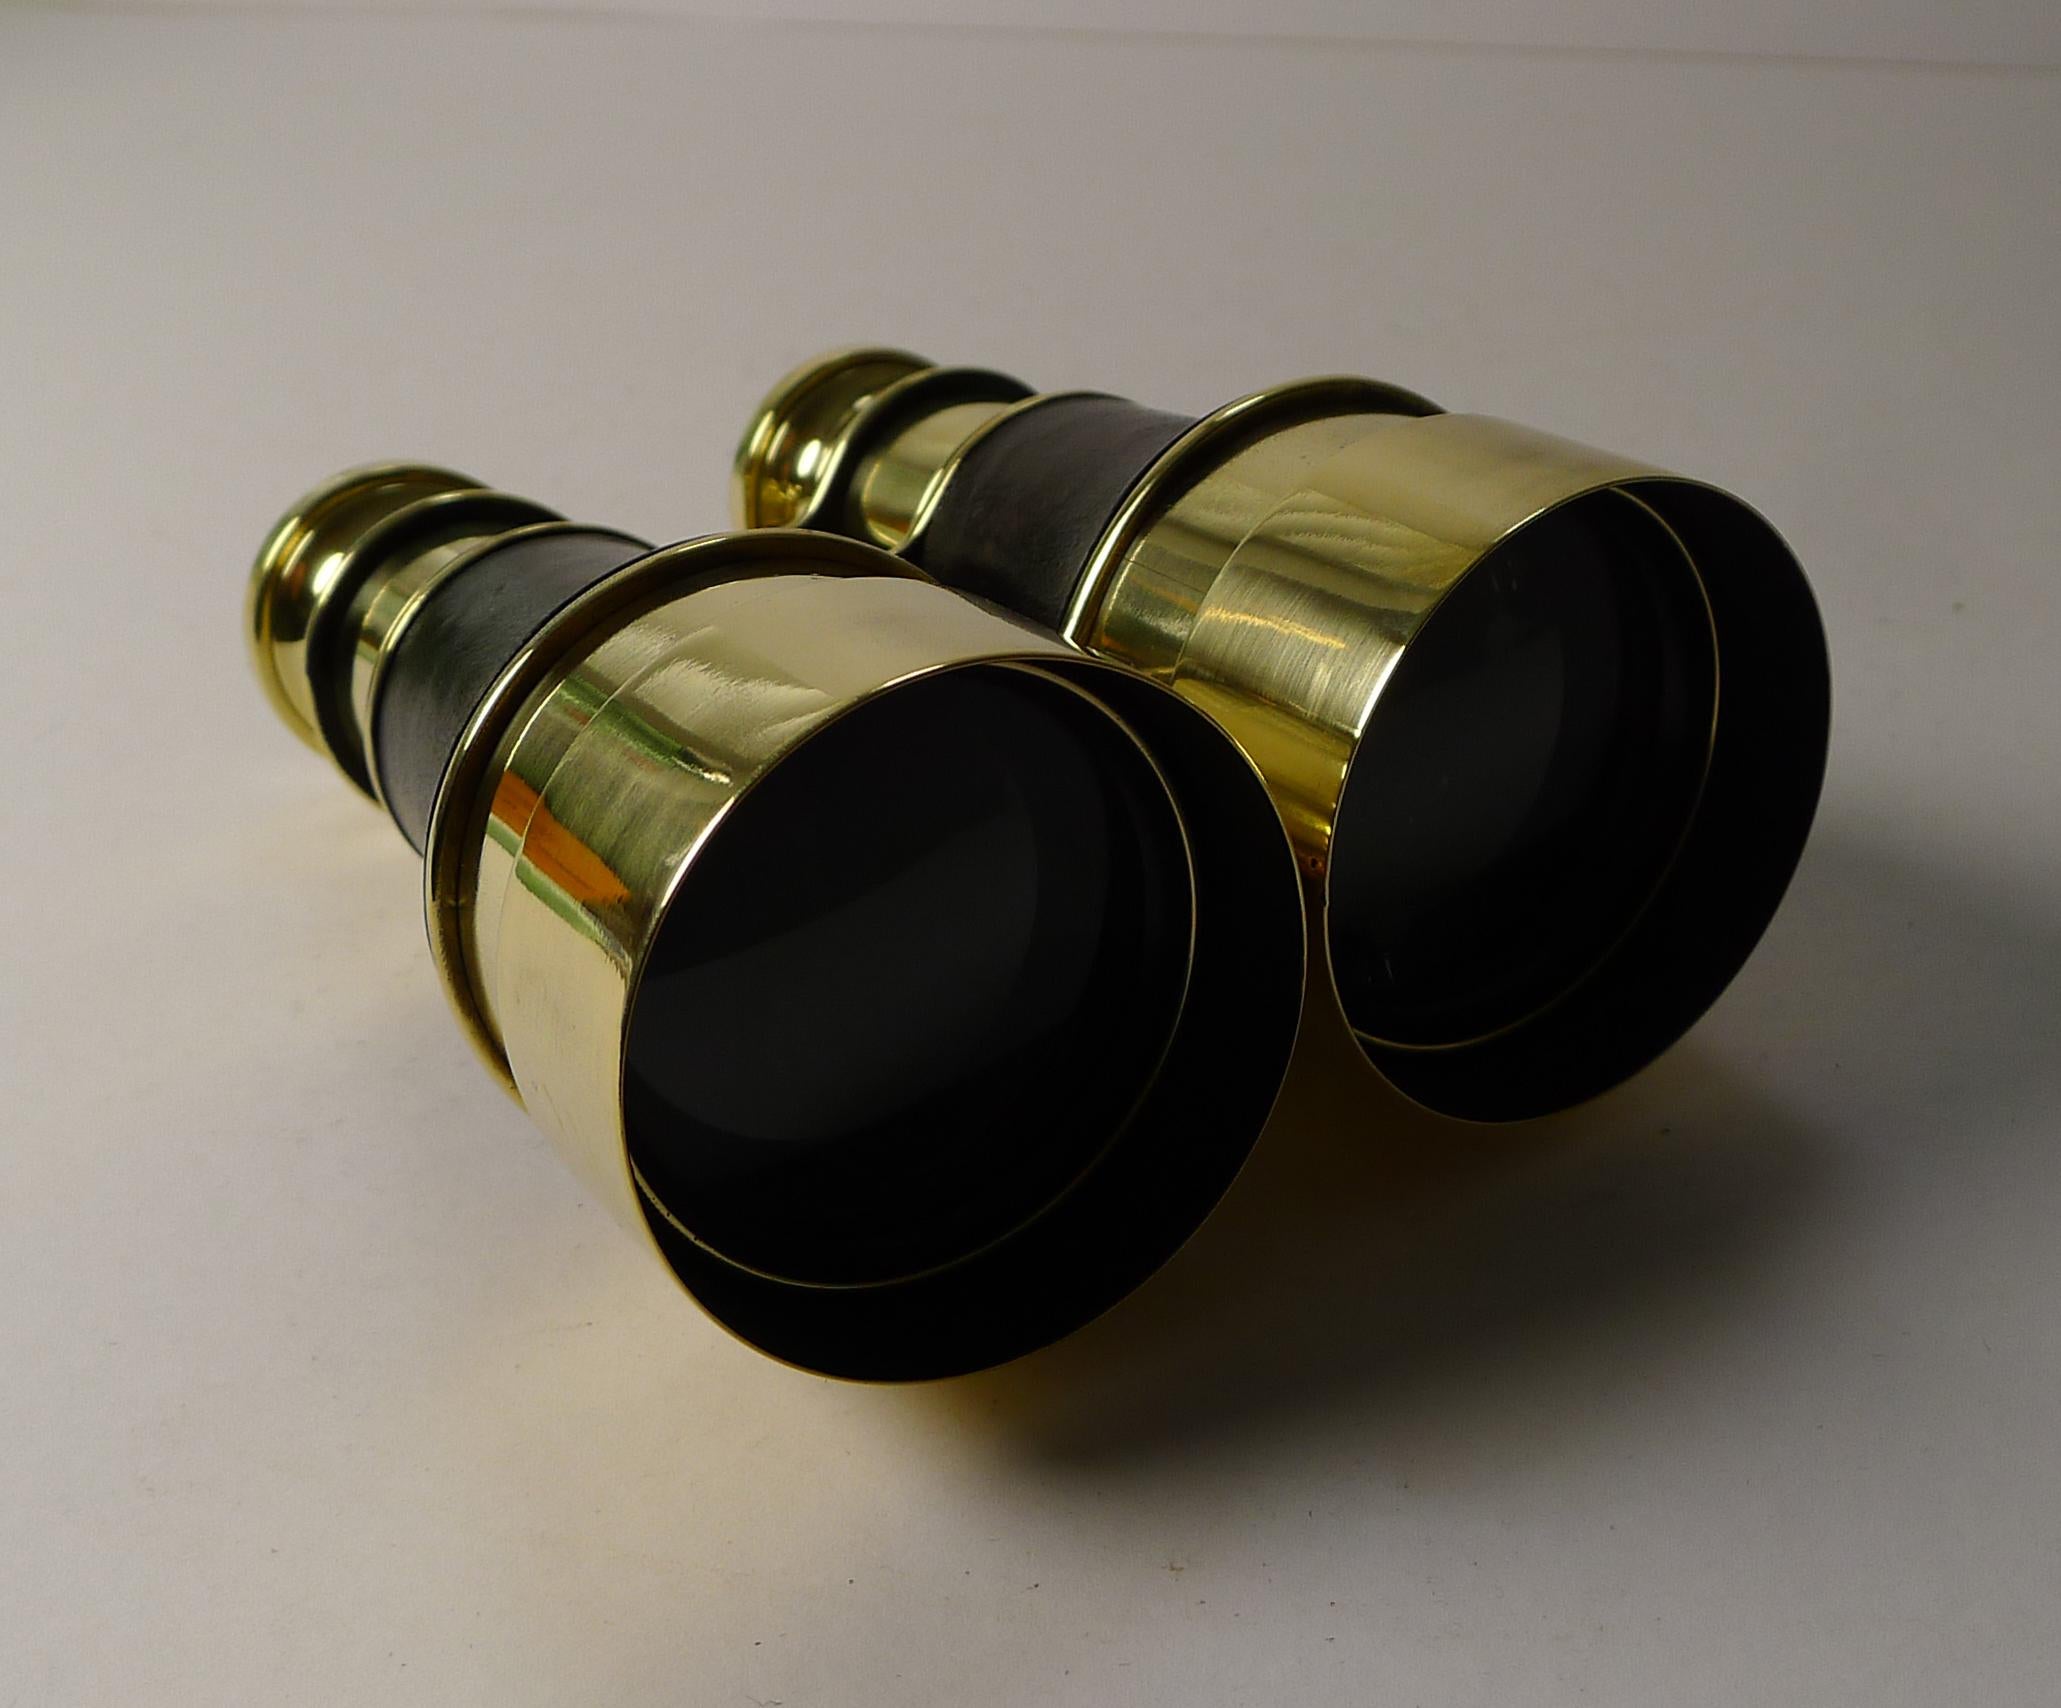 A particularly fine pair of antique English binoculars, a pair we have not come across before. The brass eye pieces are engraved with the makers 